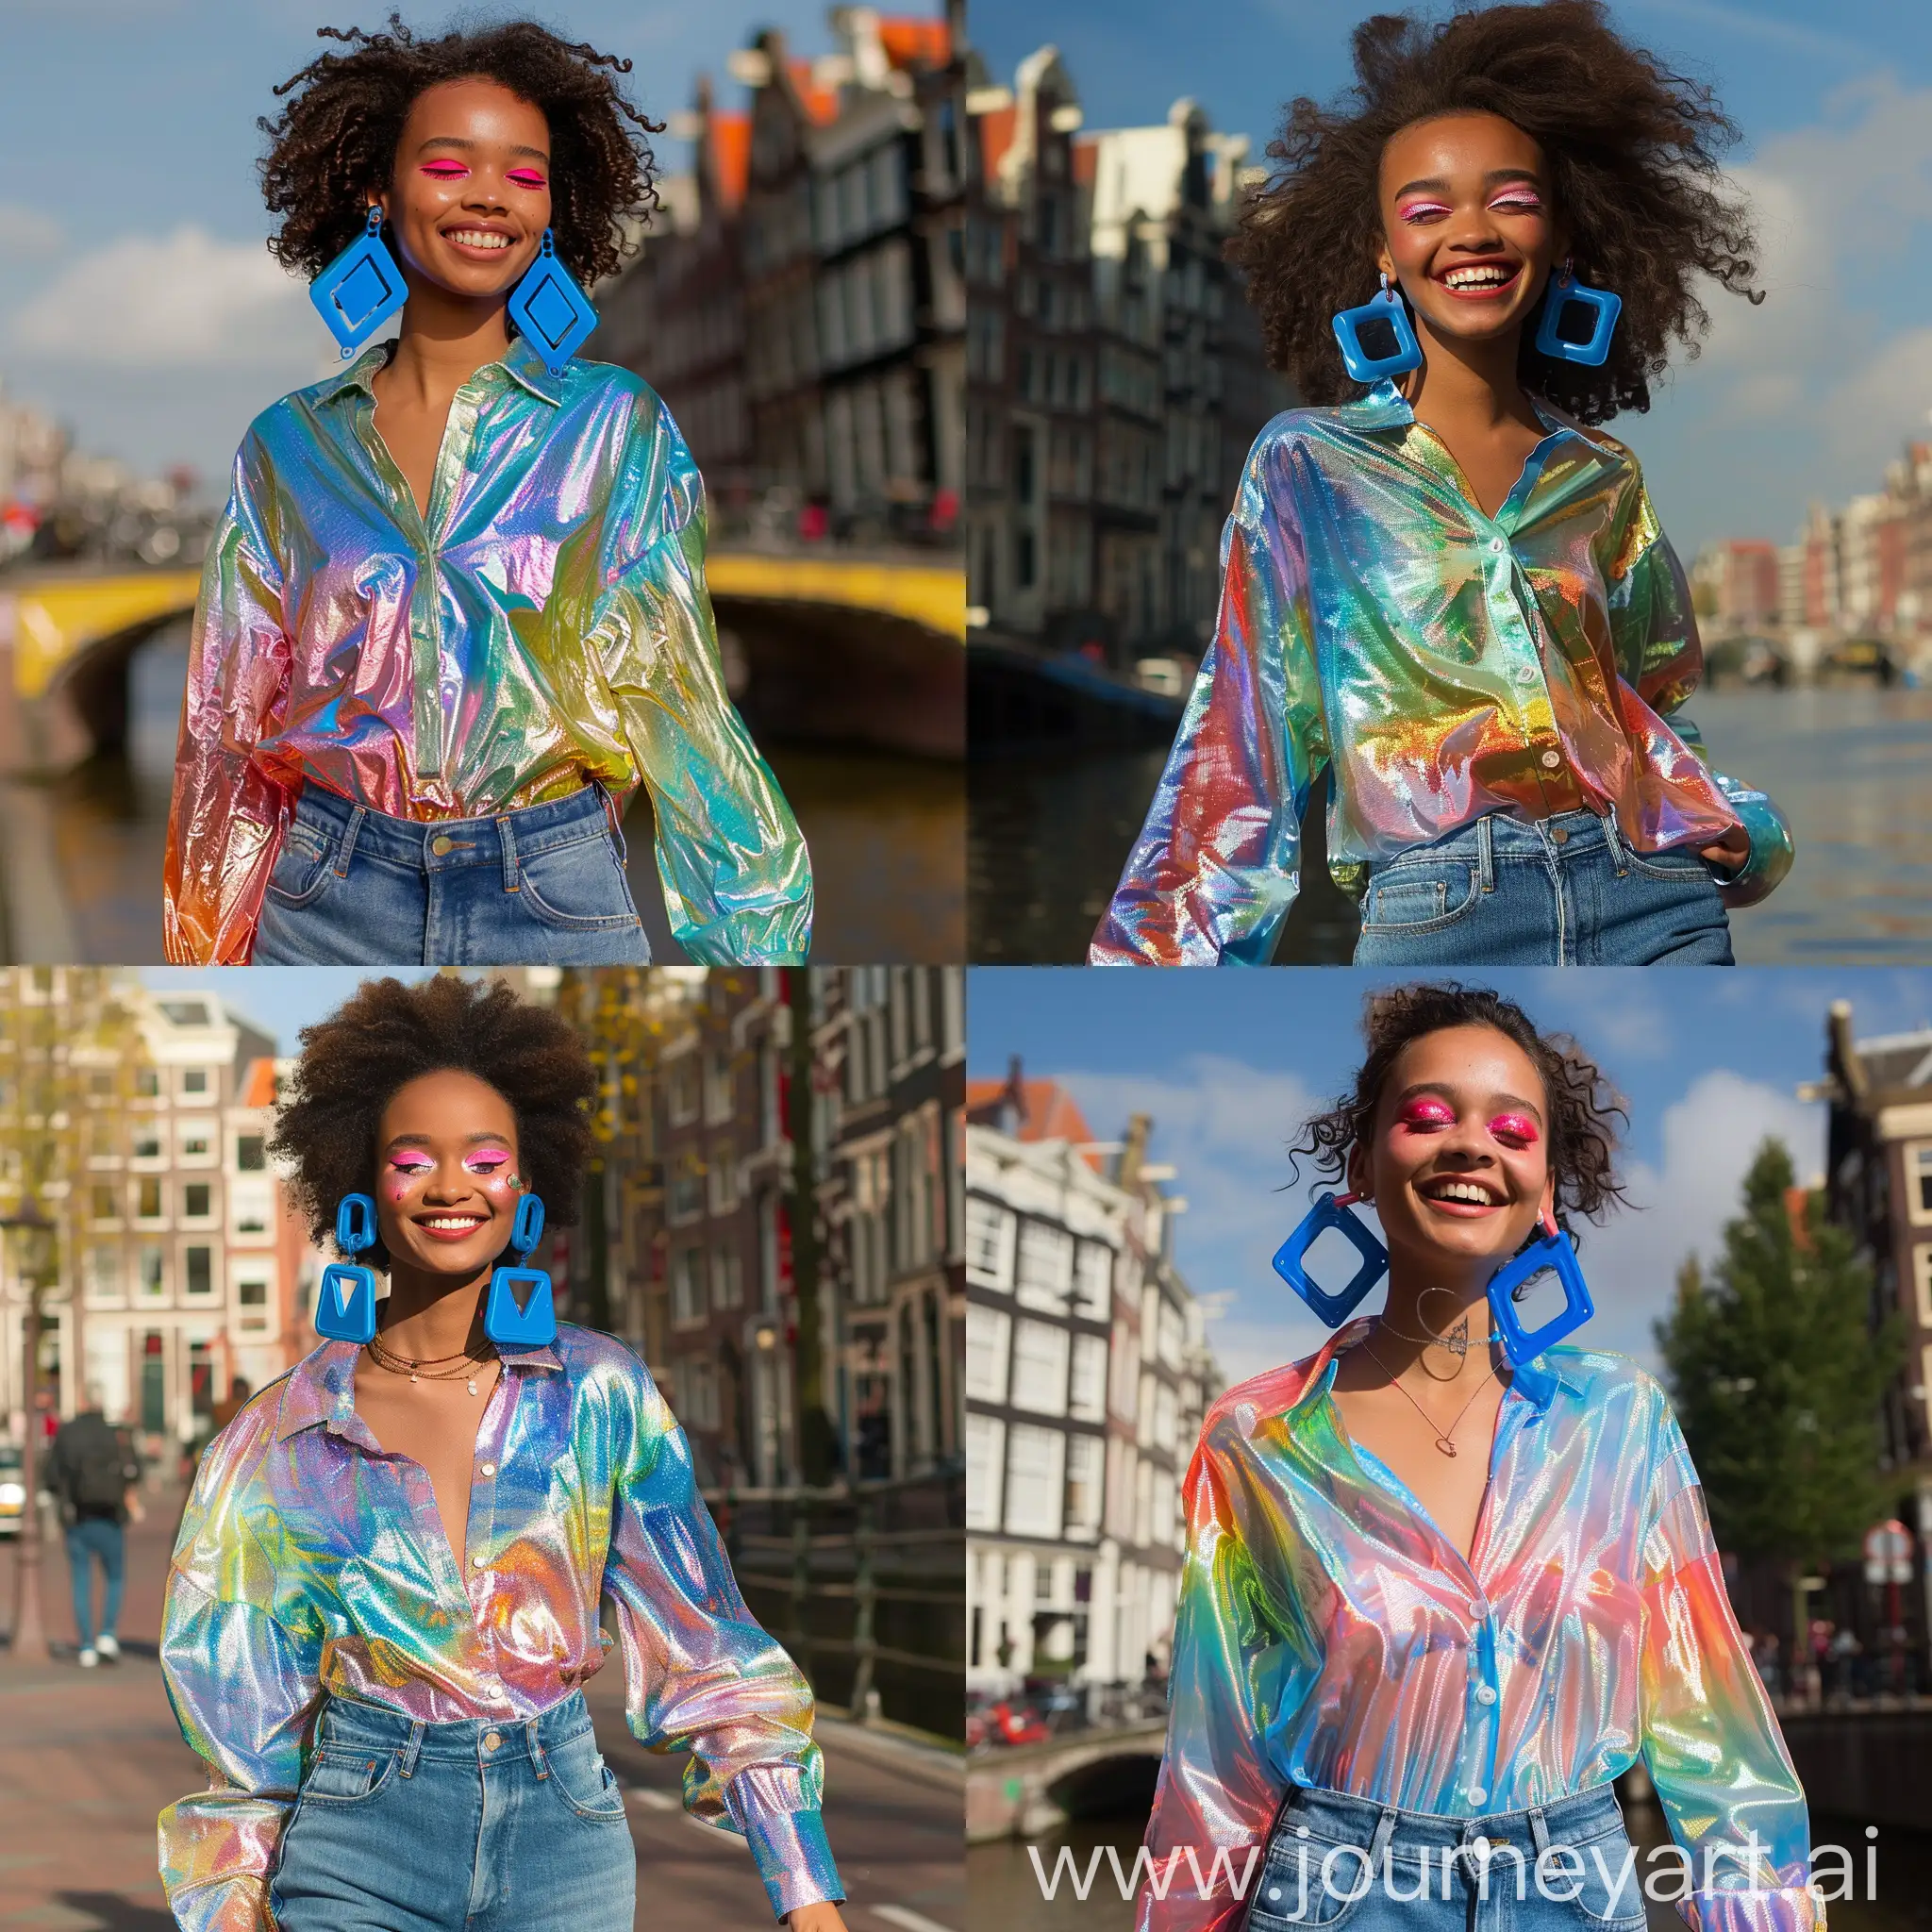 Smiling-Model-Walking-in-Amsterdam-Sunshine-with-Iridescent-Shirt-and-Rhombus-Earrings